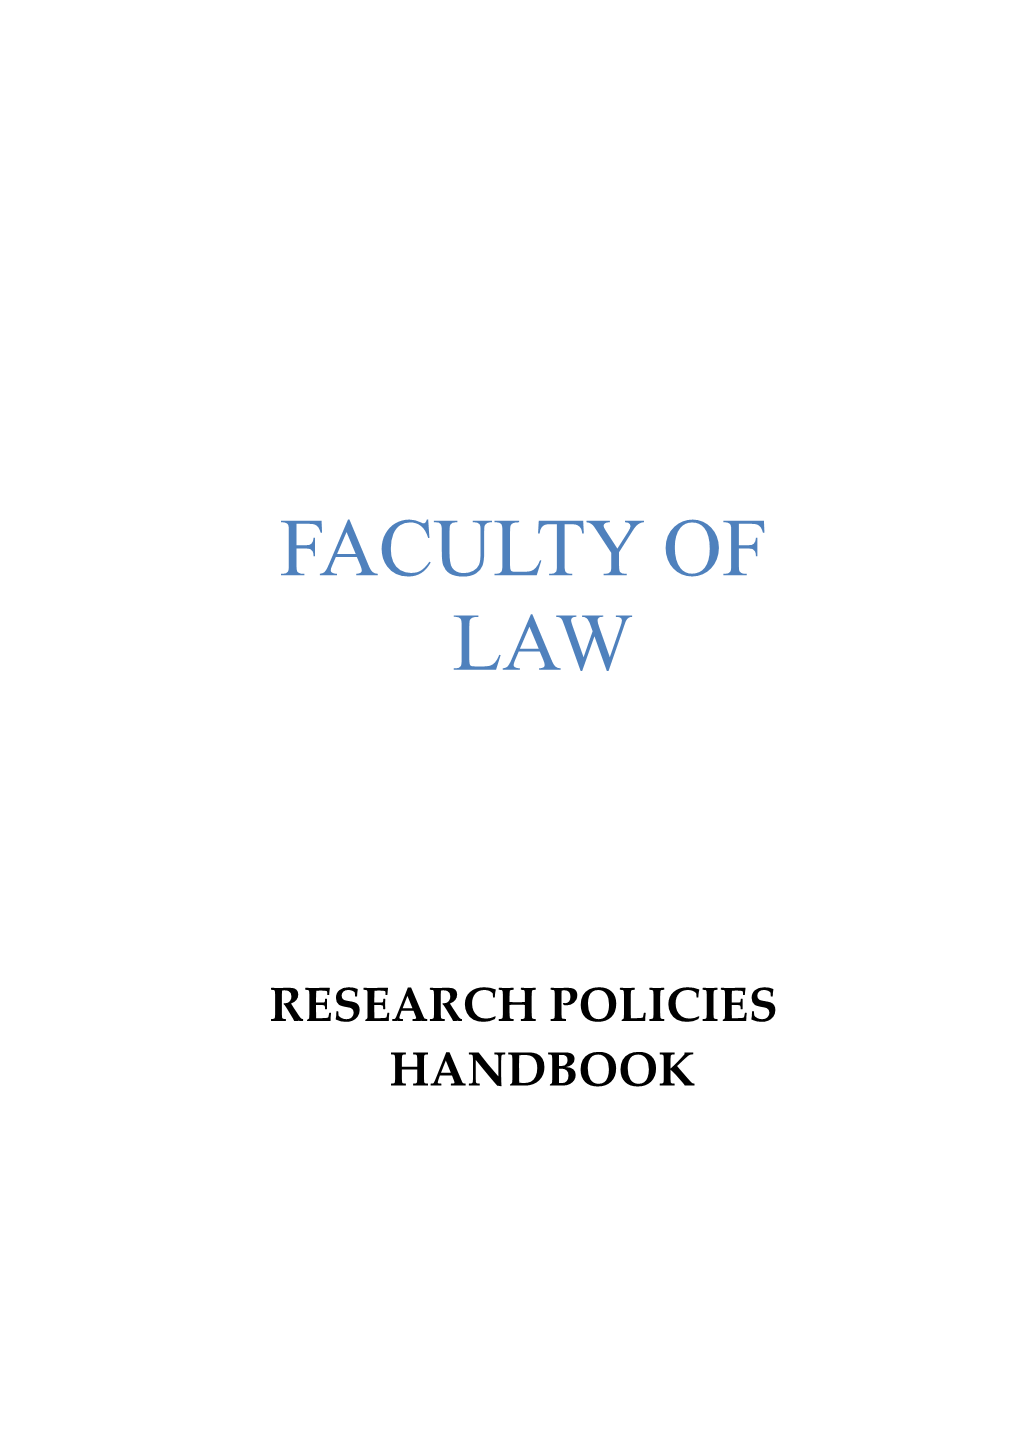 Law Faculty Statement of Values and Goals